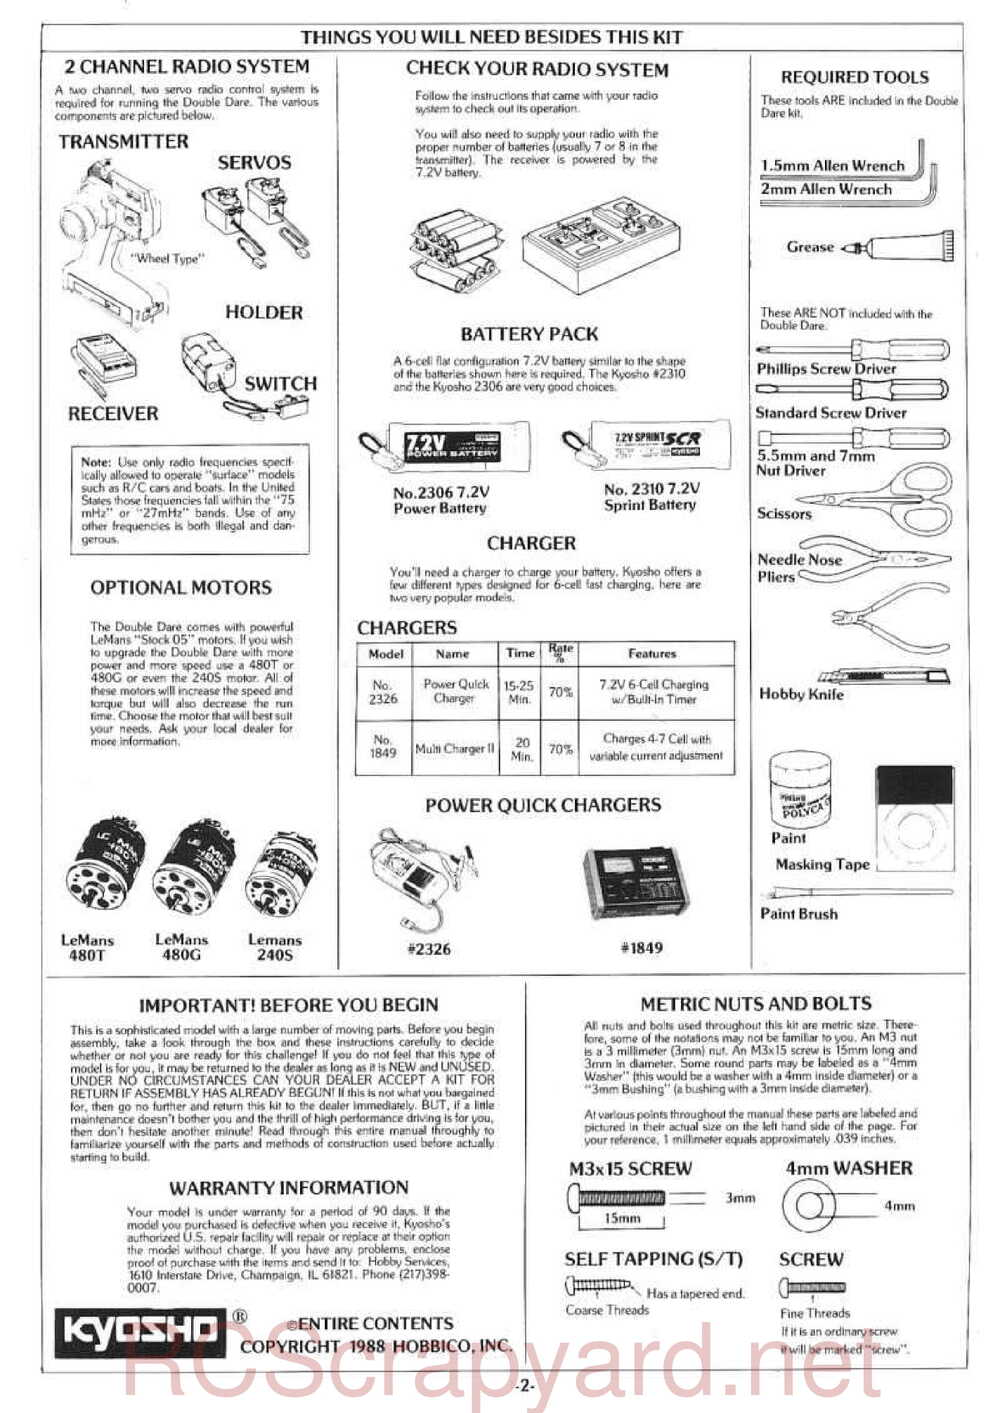 Kyosho - 3106 - Double-Dare - Manual - Page 02